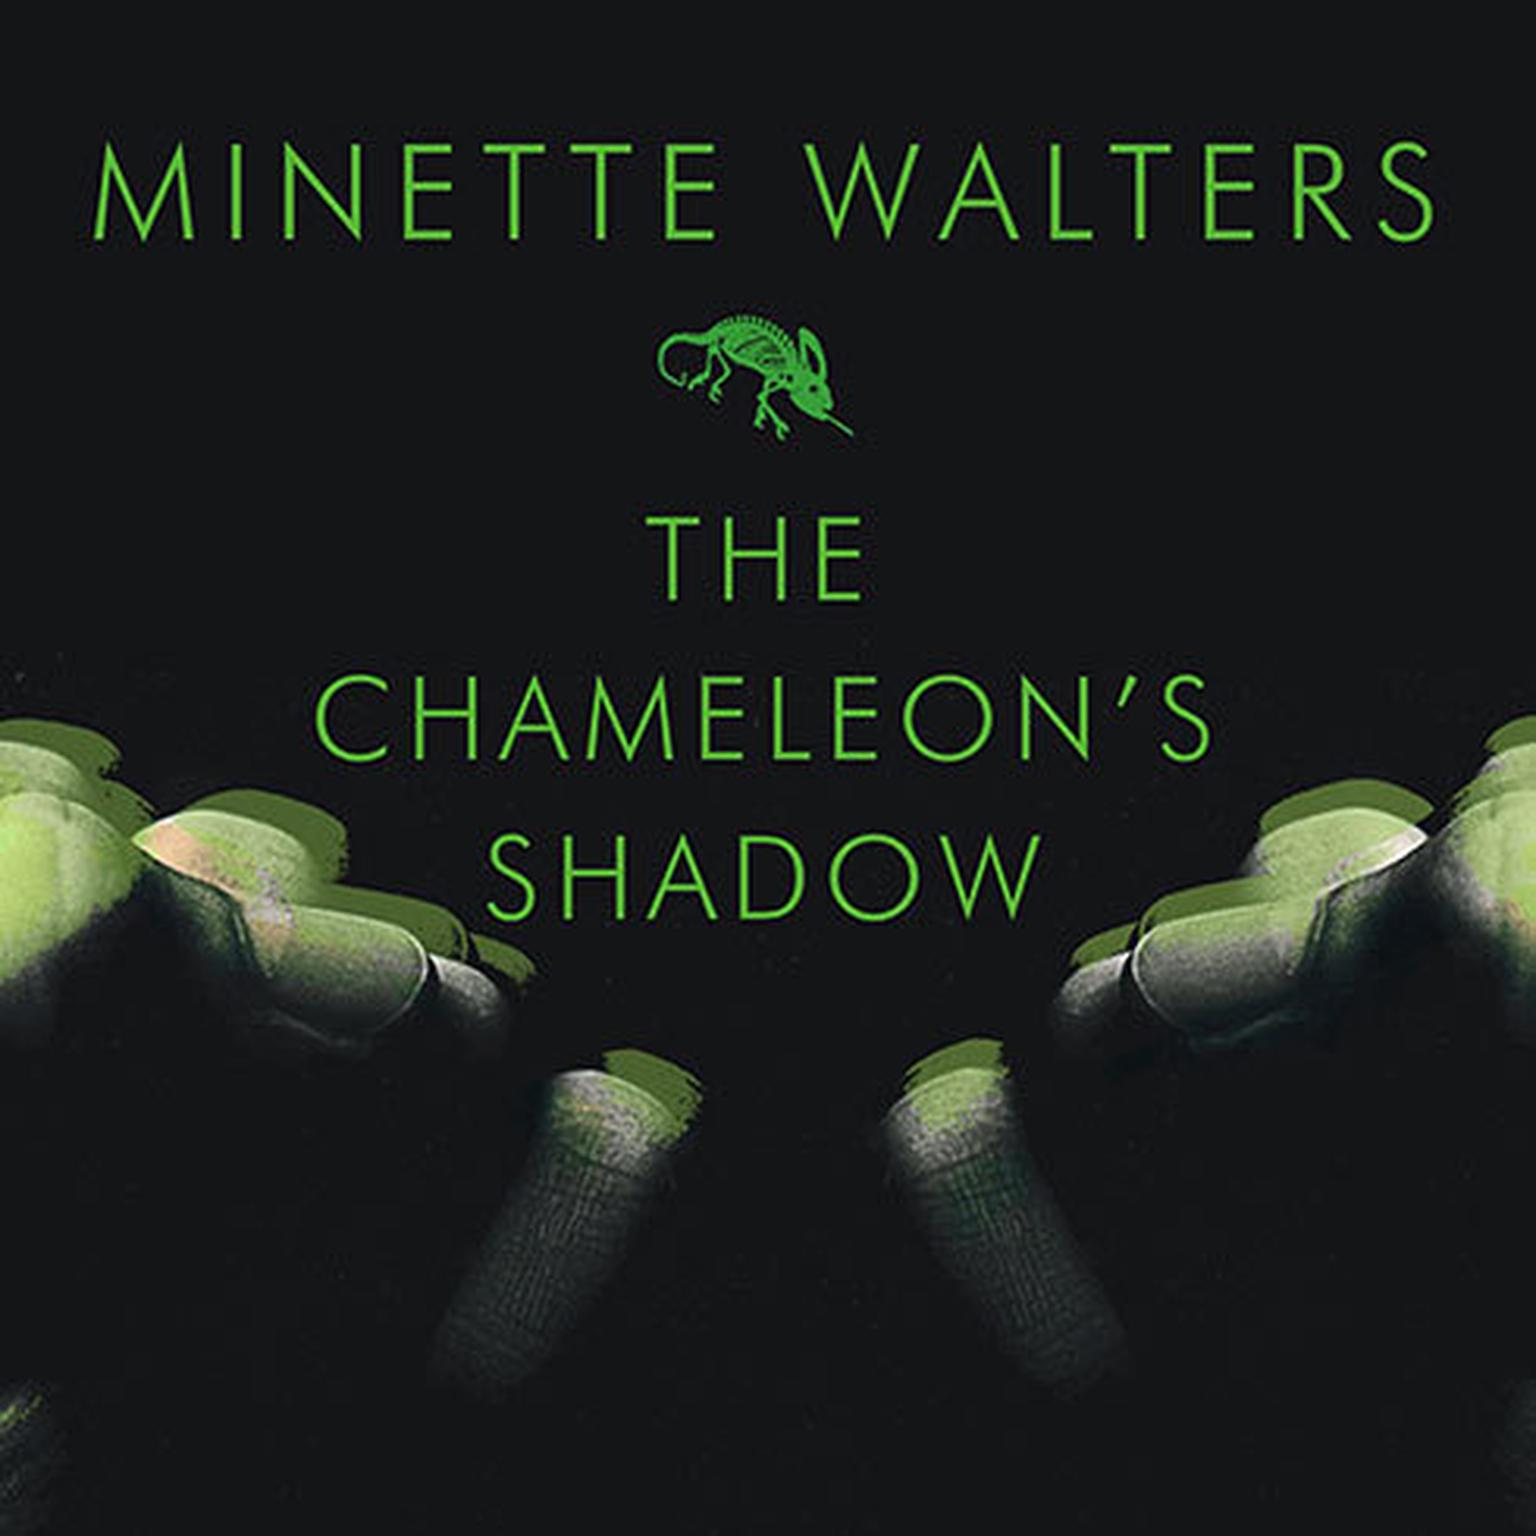 The Chameleons Shadow: A Novel Audiobook, by Minette Walters